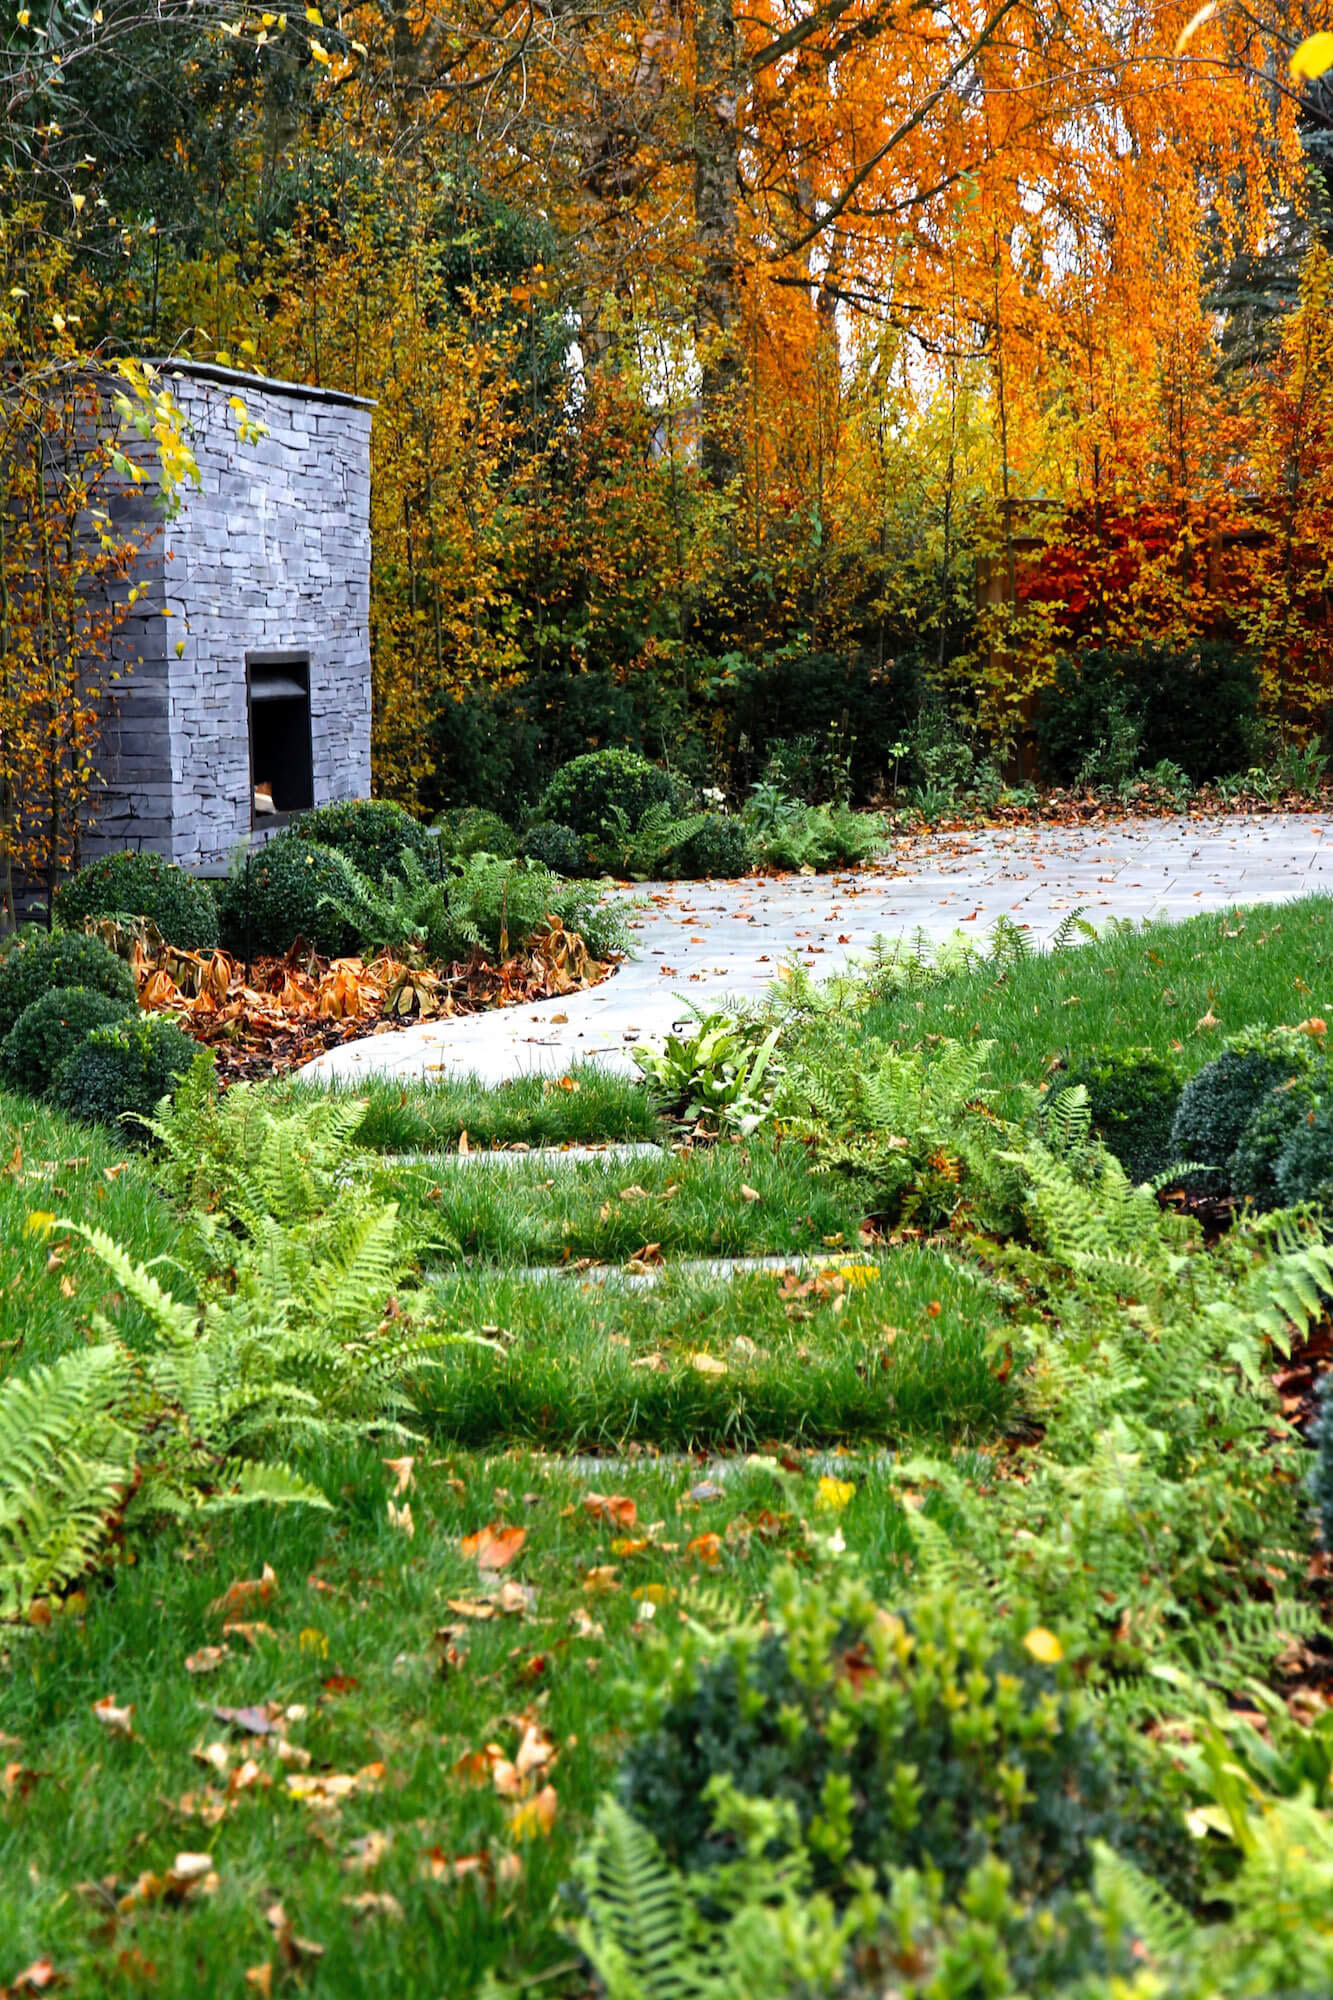 landscaped garden in September with outdoor fireplace and orange and yellow foliage and fallen leaves